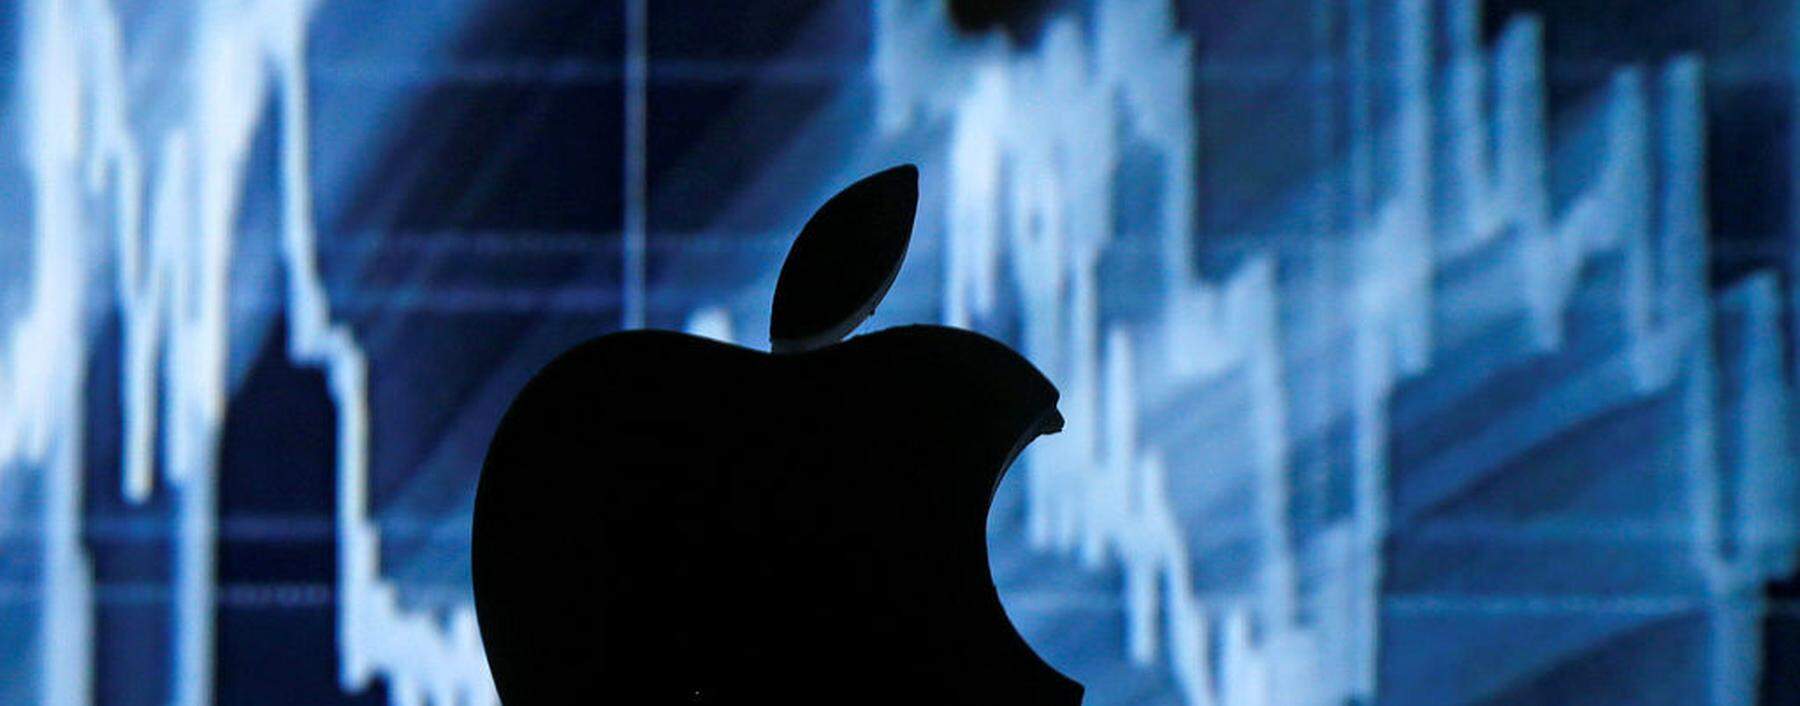 A 3D printed Apple logo is seen in front of a displayed stock graph in this illustration taken